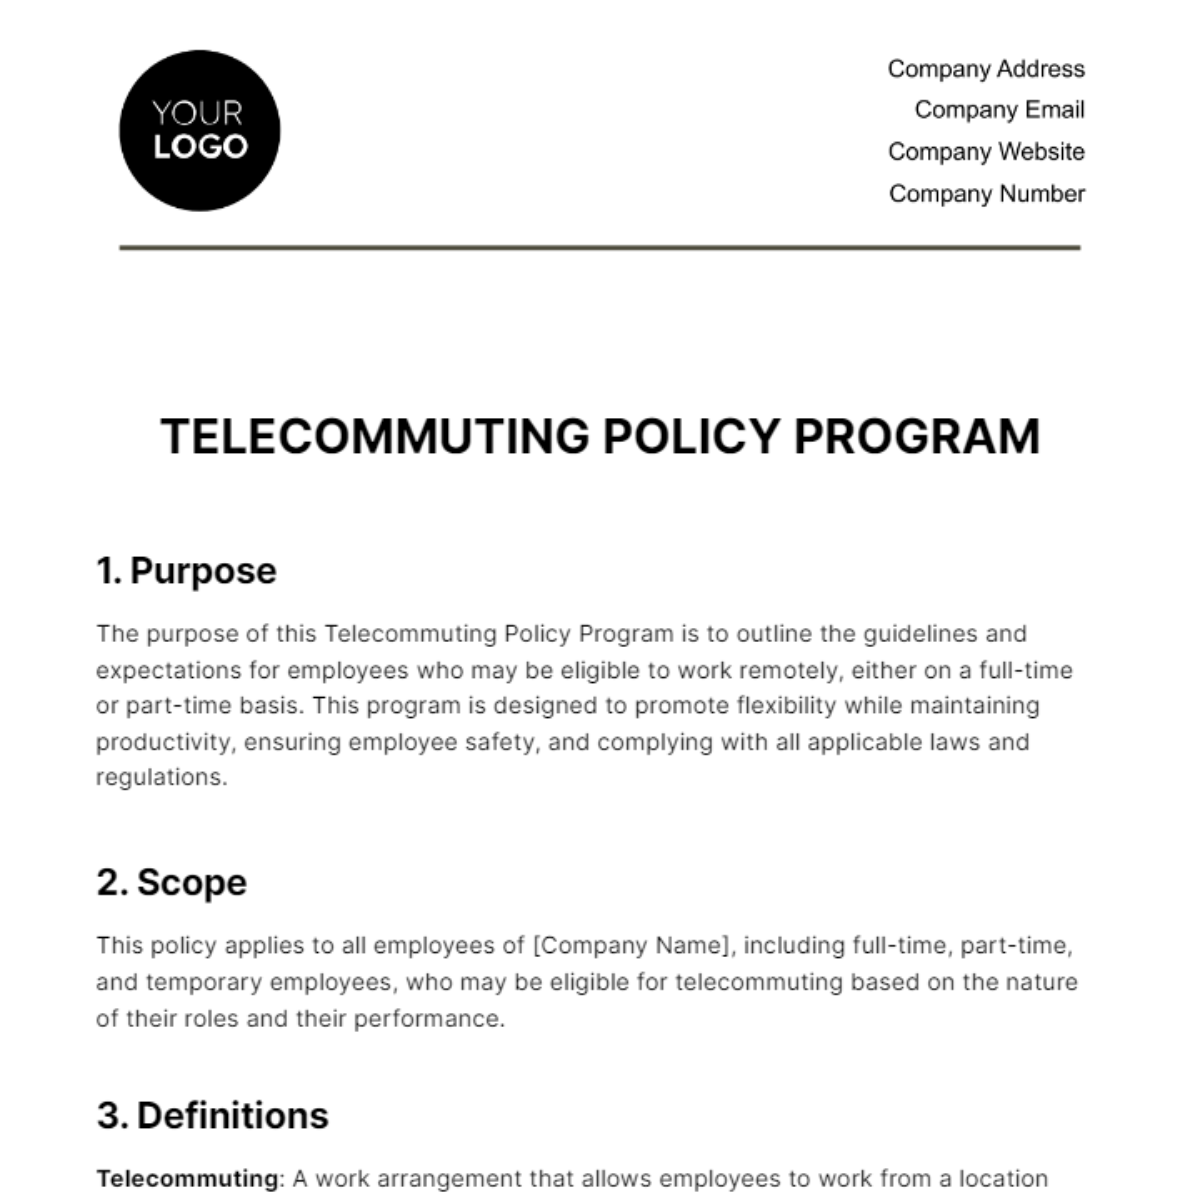 Free Telecommuting Policy Program HR Template